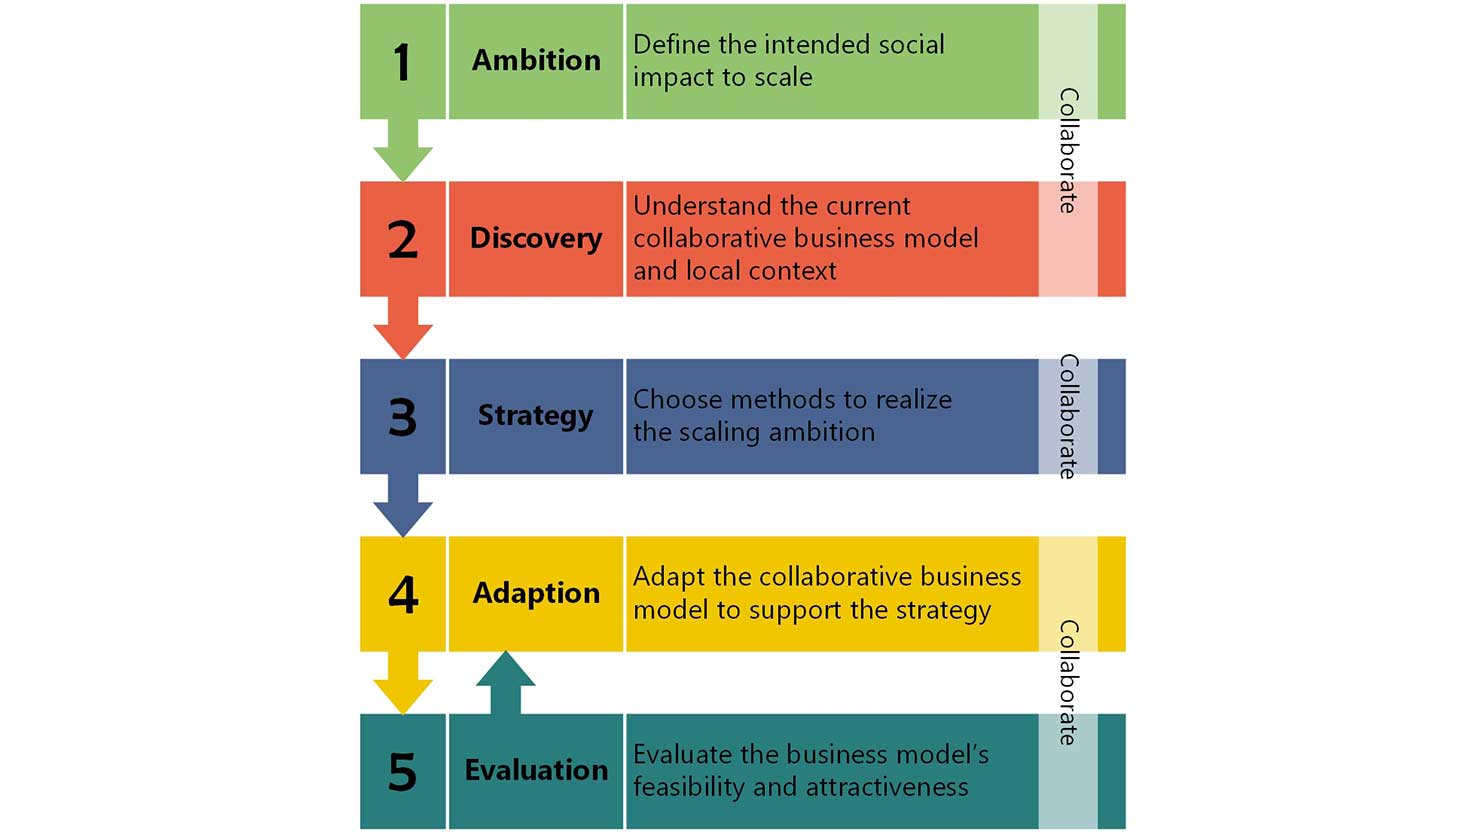 five-steps-of-collaborative-business-modelling-for-scaling-inclusive-business-impact_1